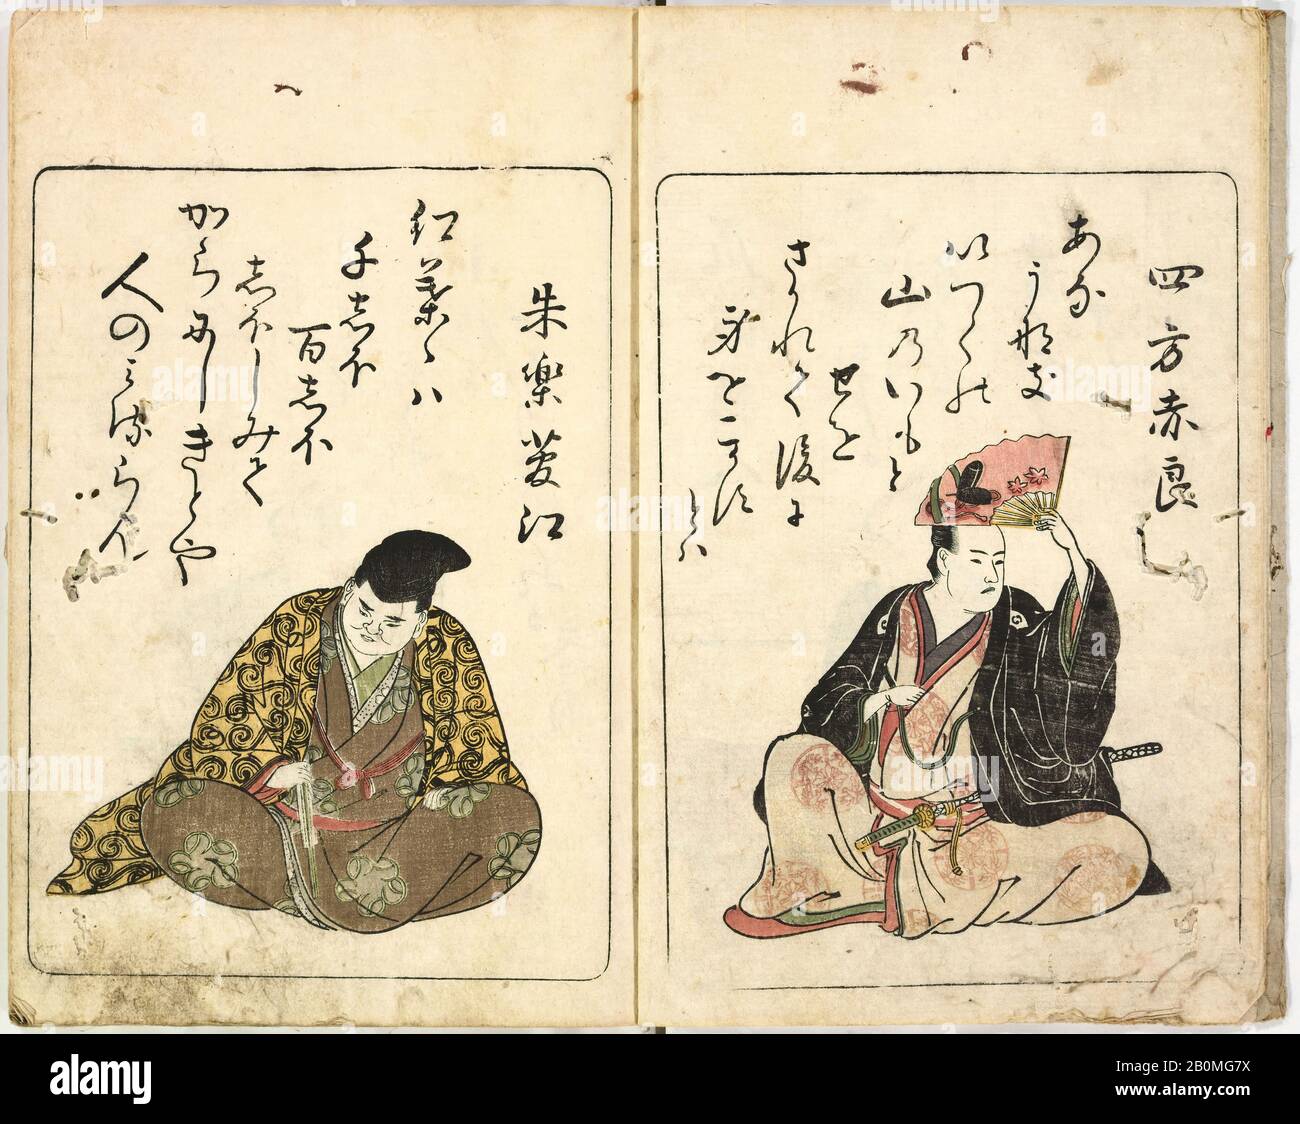 Kitao Masanobu (Santō Kyōden), A New Series of Fifty Poets' Stanzas of the Temmei Period; A Bookcase of Humorous Poems in the Azuma (i.e. Edo) Style, Japan, Edo period (1615–1868), Kitao Masanobu (Santō Kyōden) (Japanese, 1761–1816), January 30, 1786, Japan, Ink and color on paper, 10 1/4 x 7 in. (26 x 17.8 cm), Illustrated Books Stock Photo